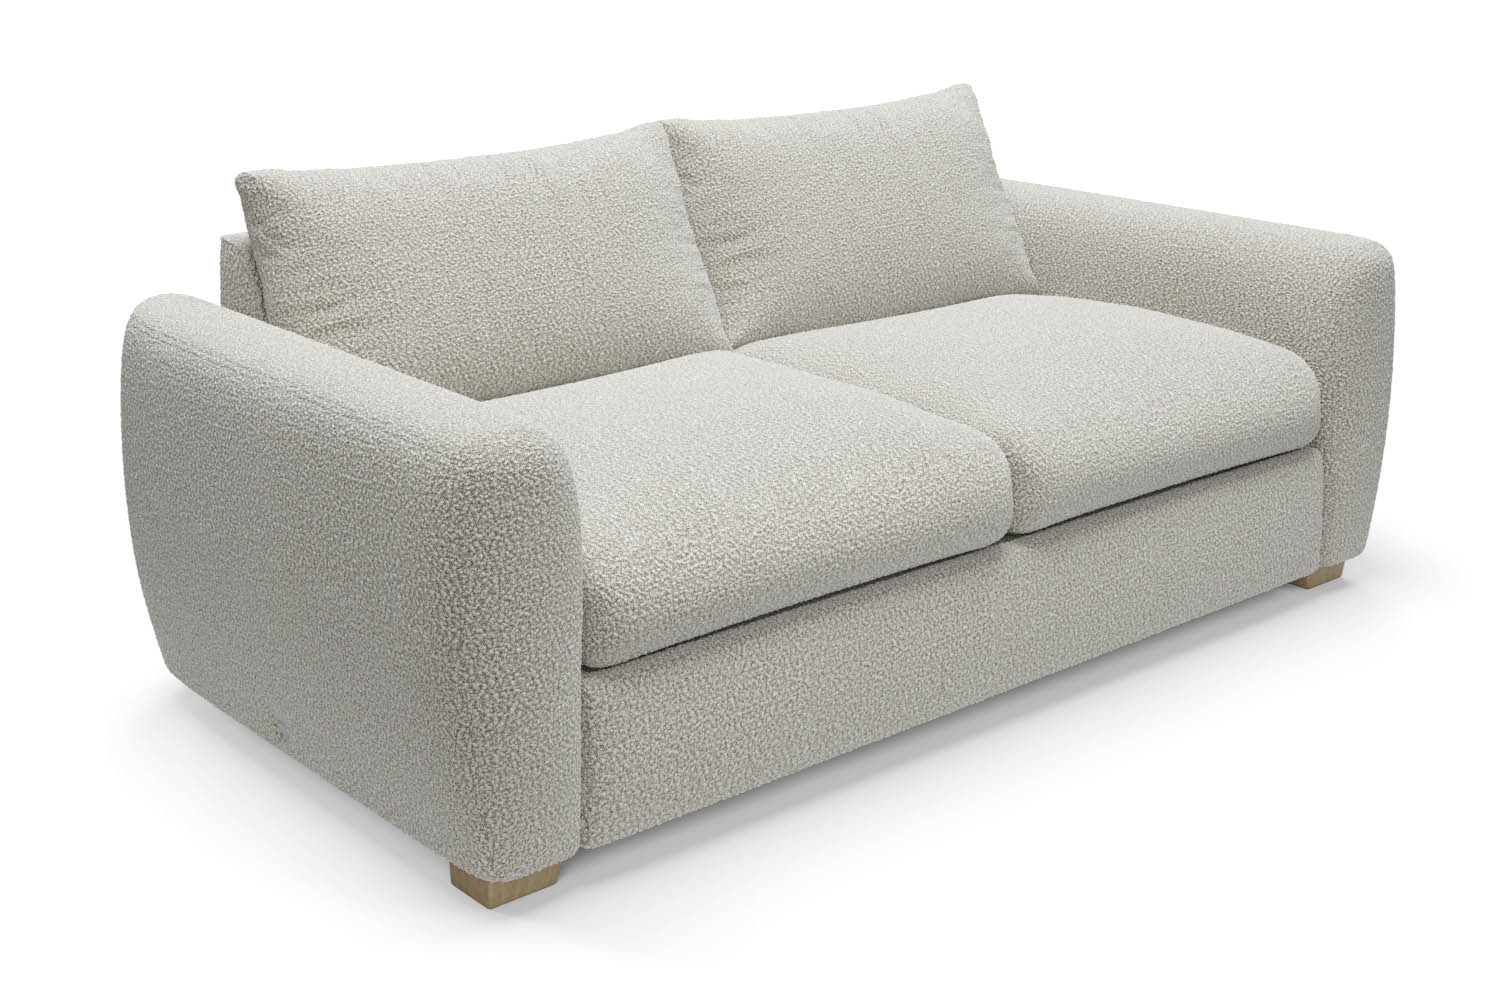 The Cloud Sundae - 3 Seater Sofa Bed - Fuzzy White Boucle